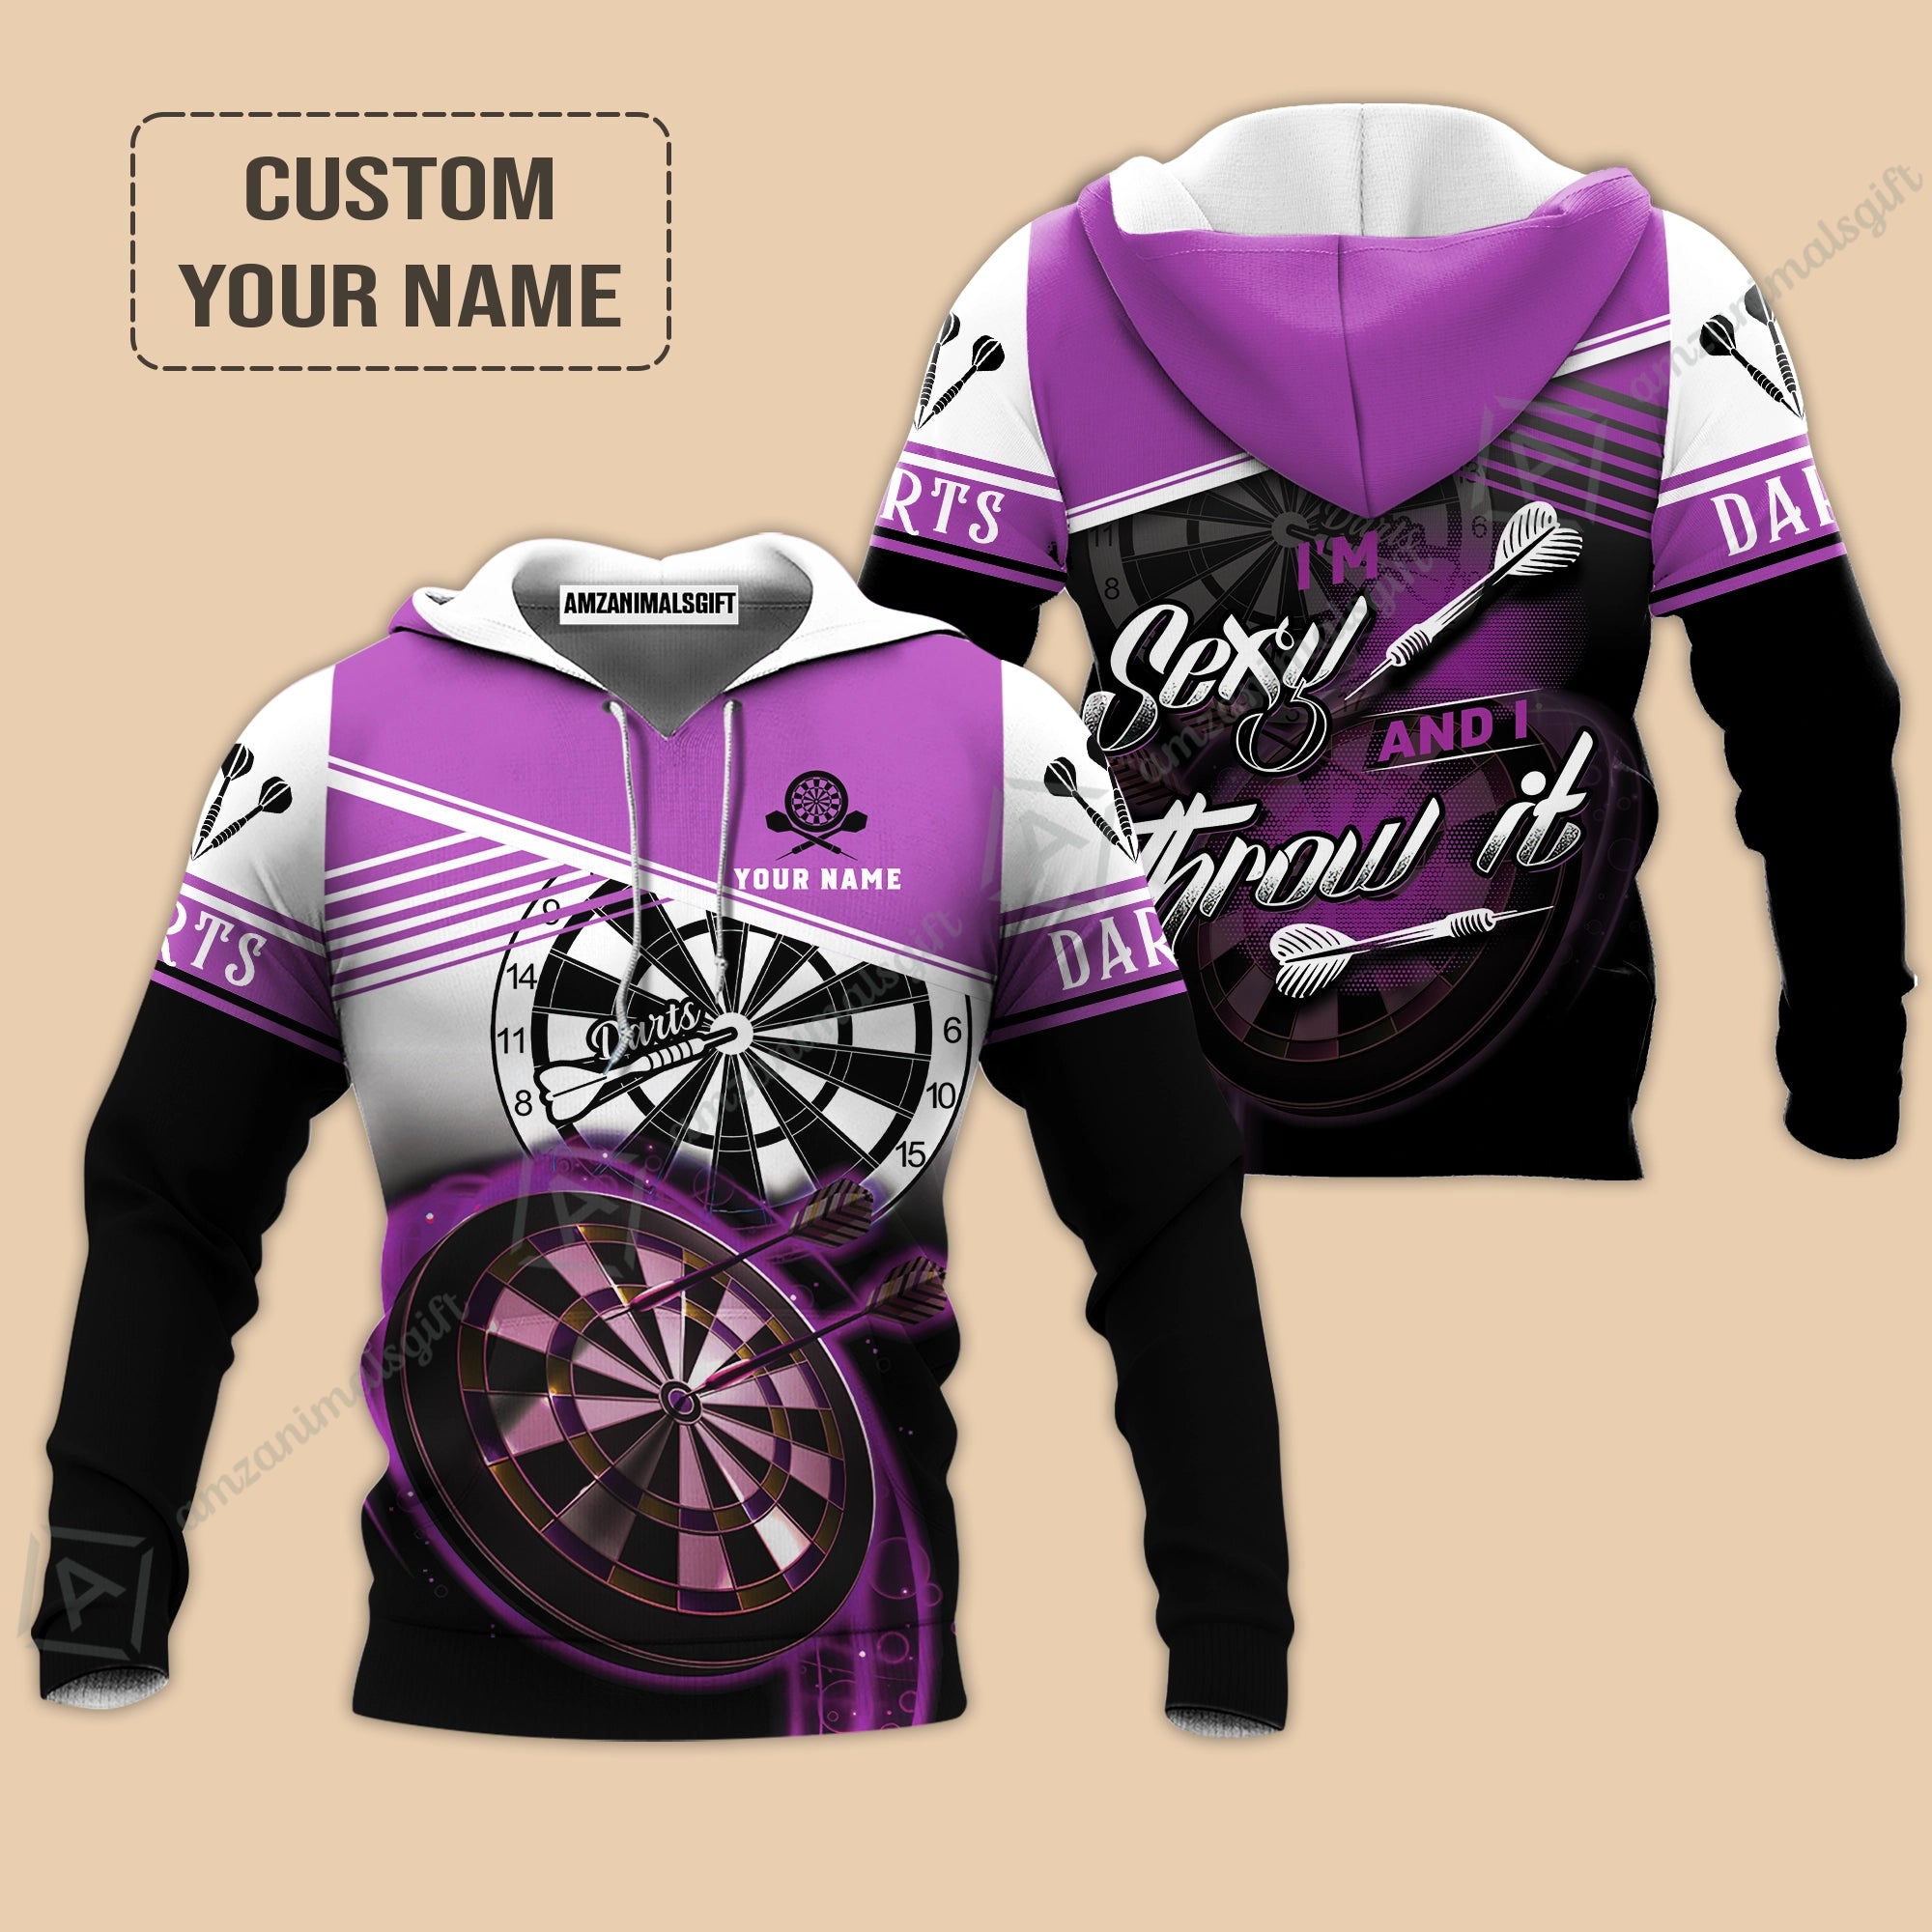 Personalized Darts Hoodie, Darts Purple Color Customized Shirt I'm Sexy And I Throw It, Outfits For Darts Players, Darts Team